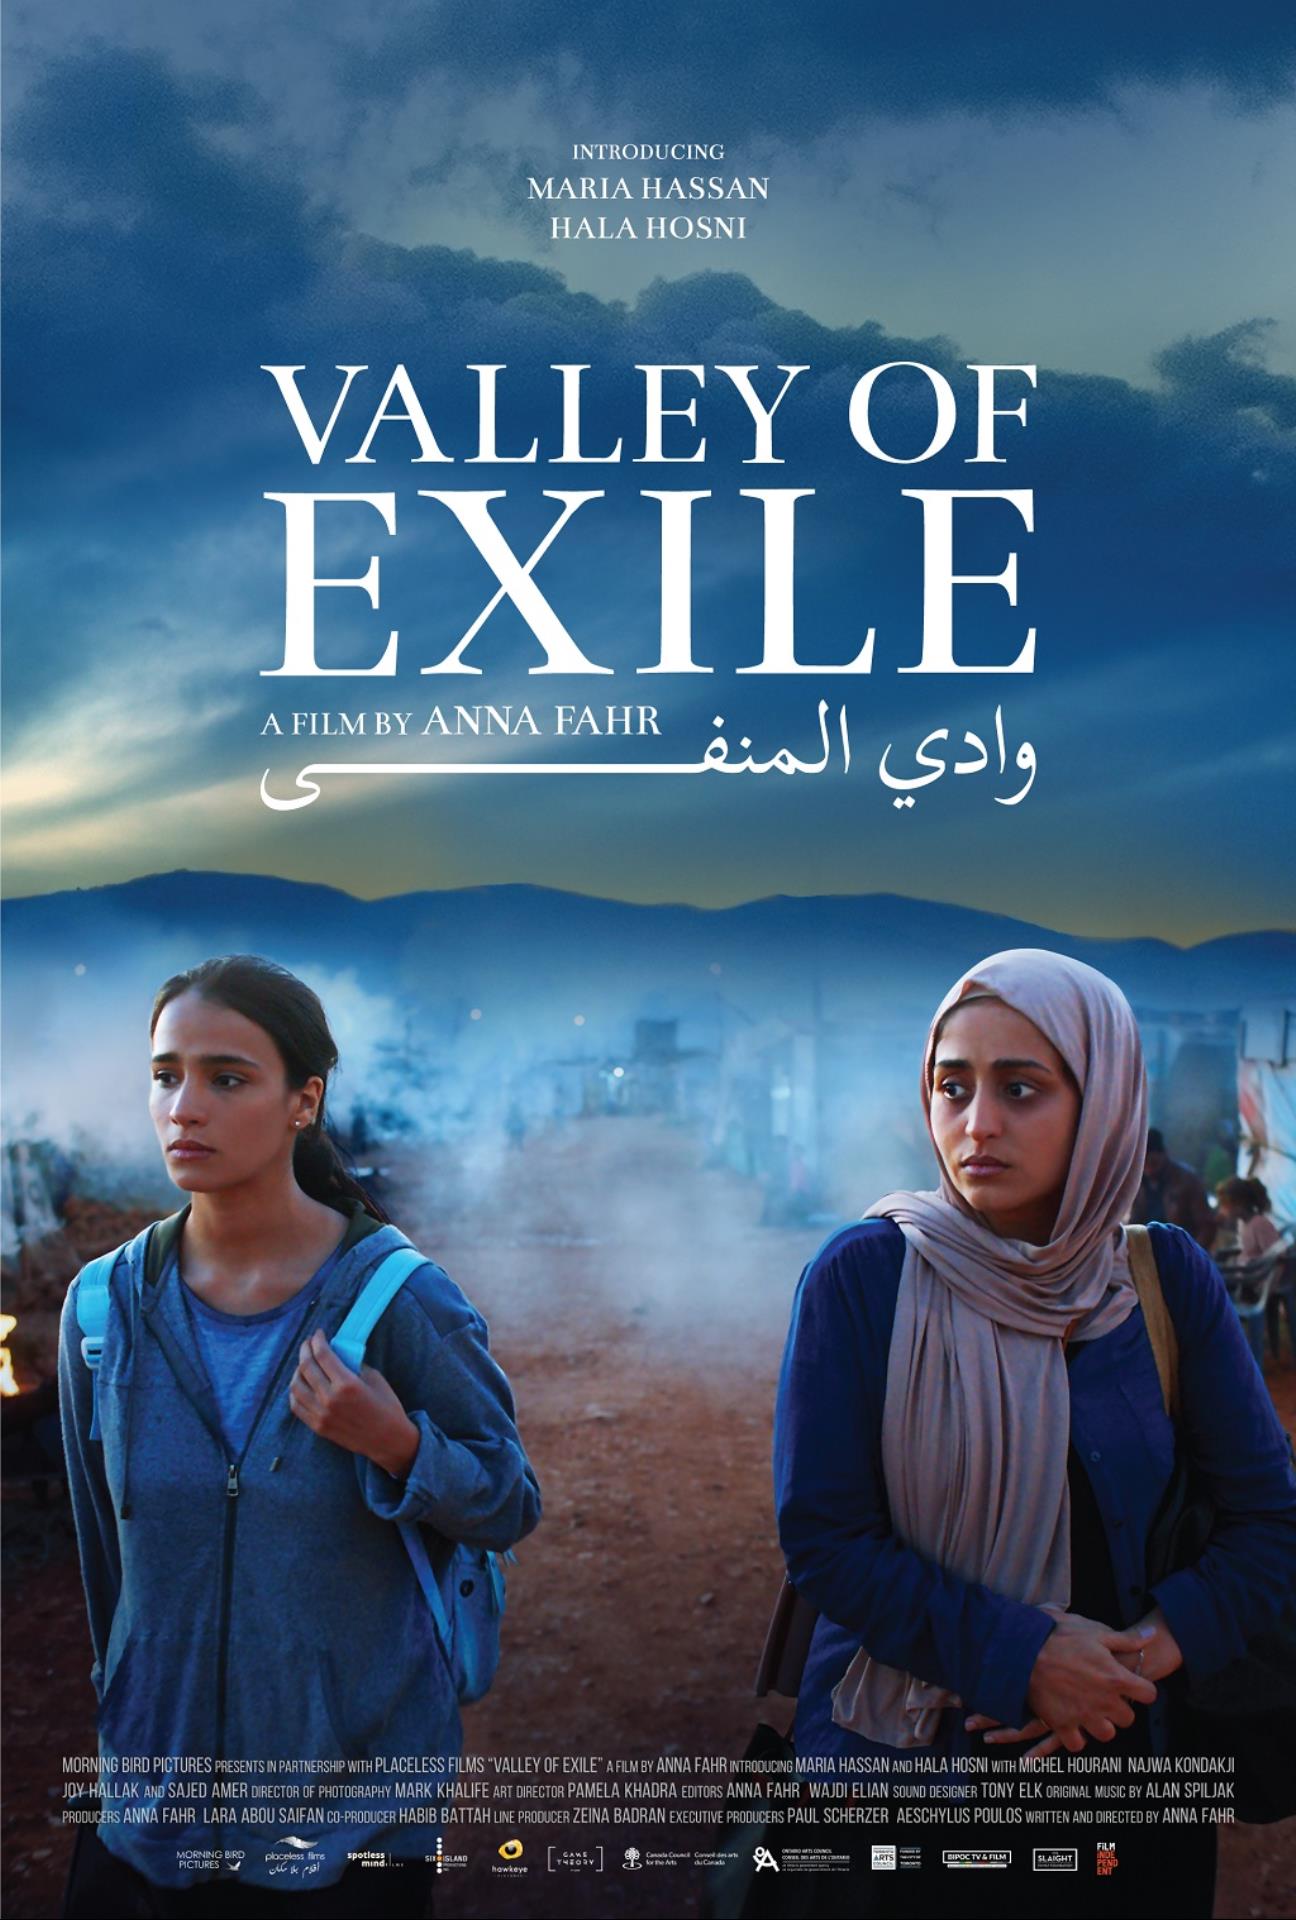 VALLEY OF EXILE